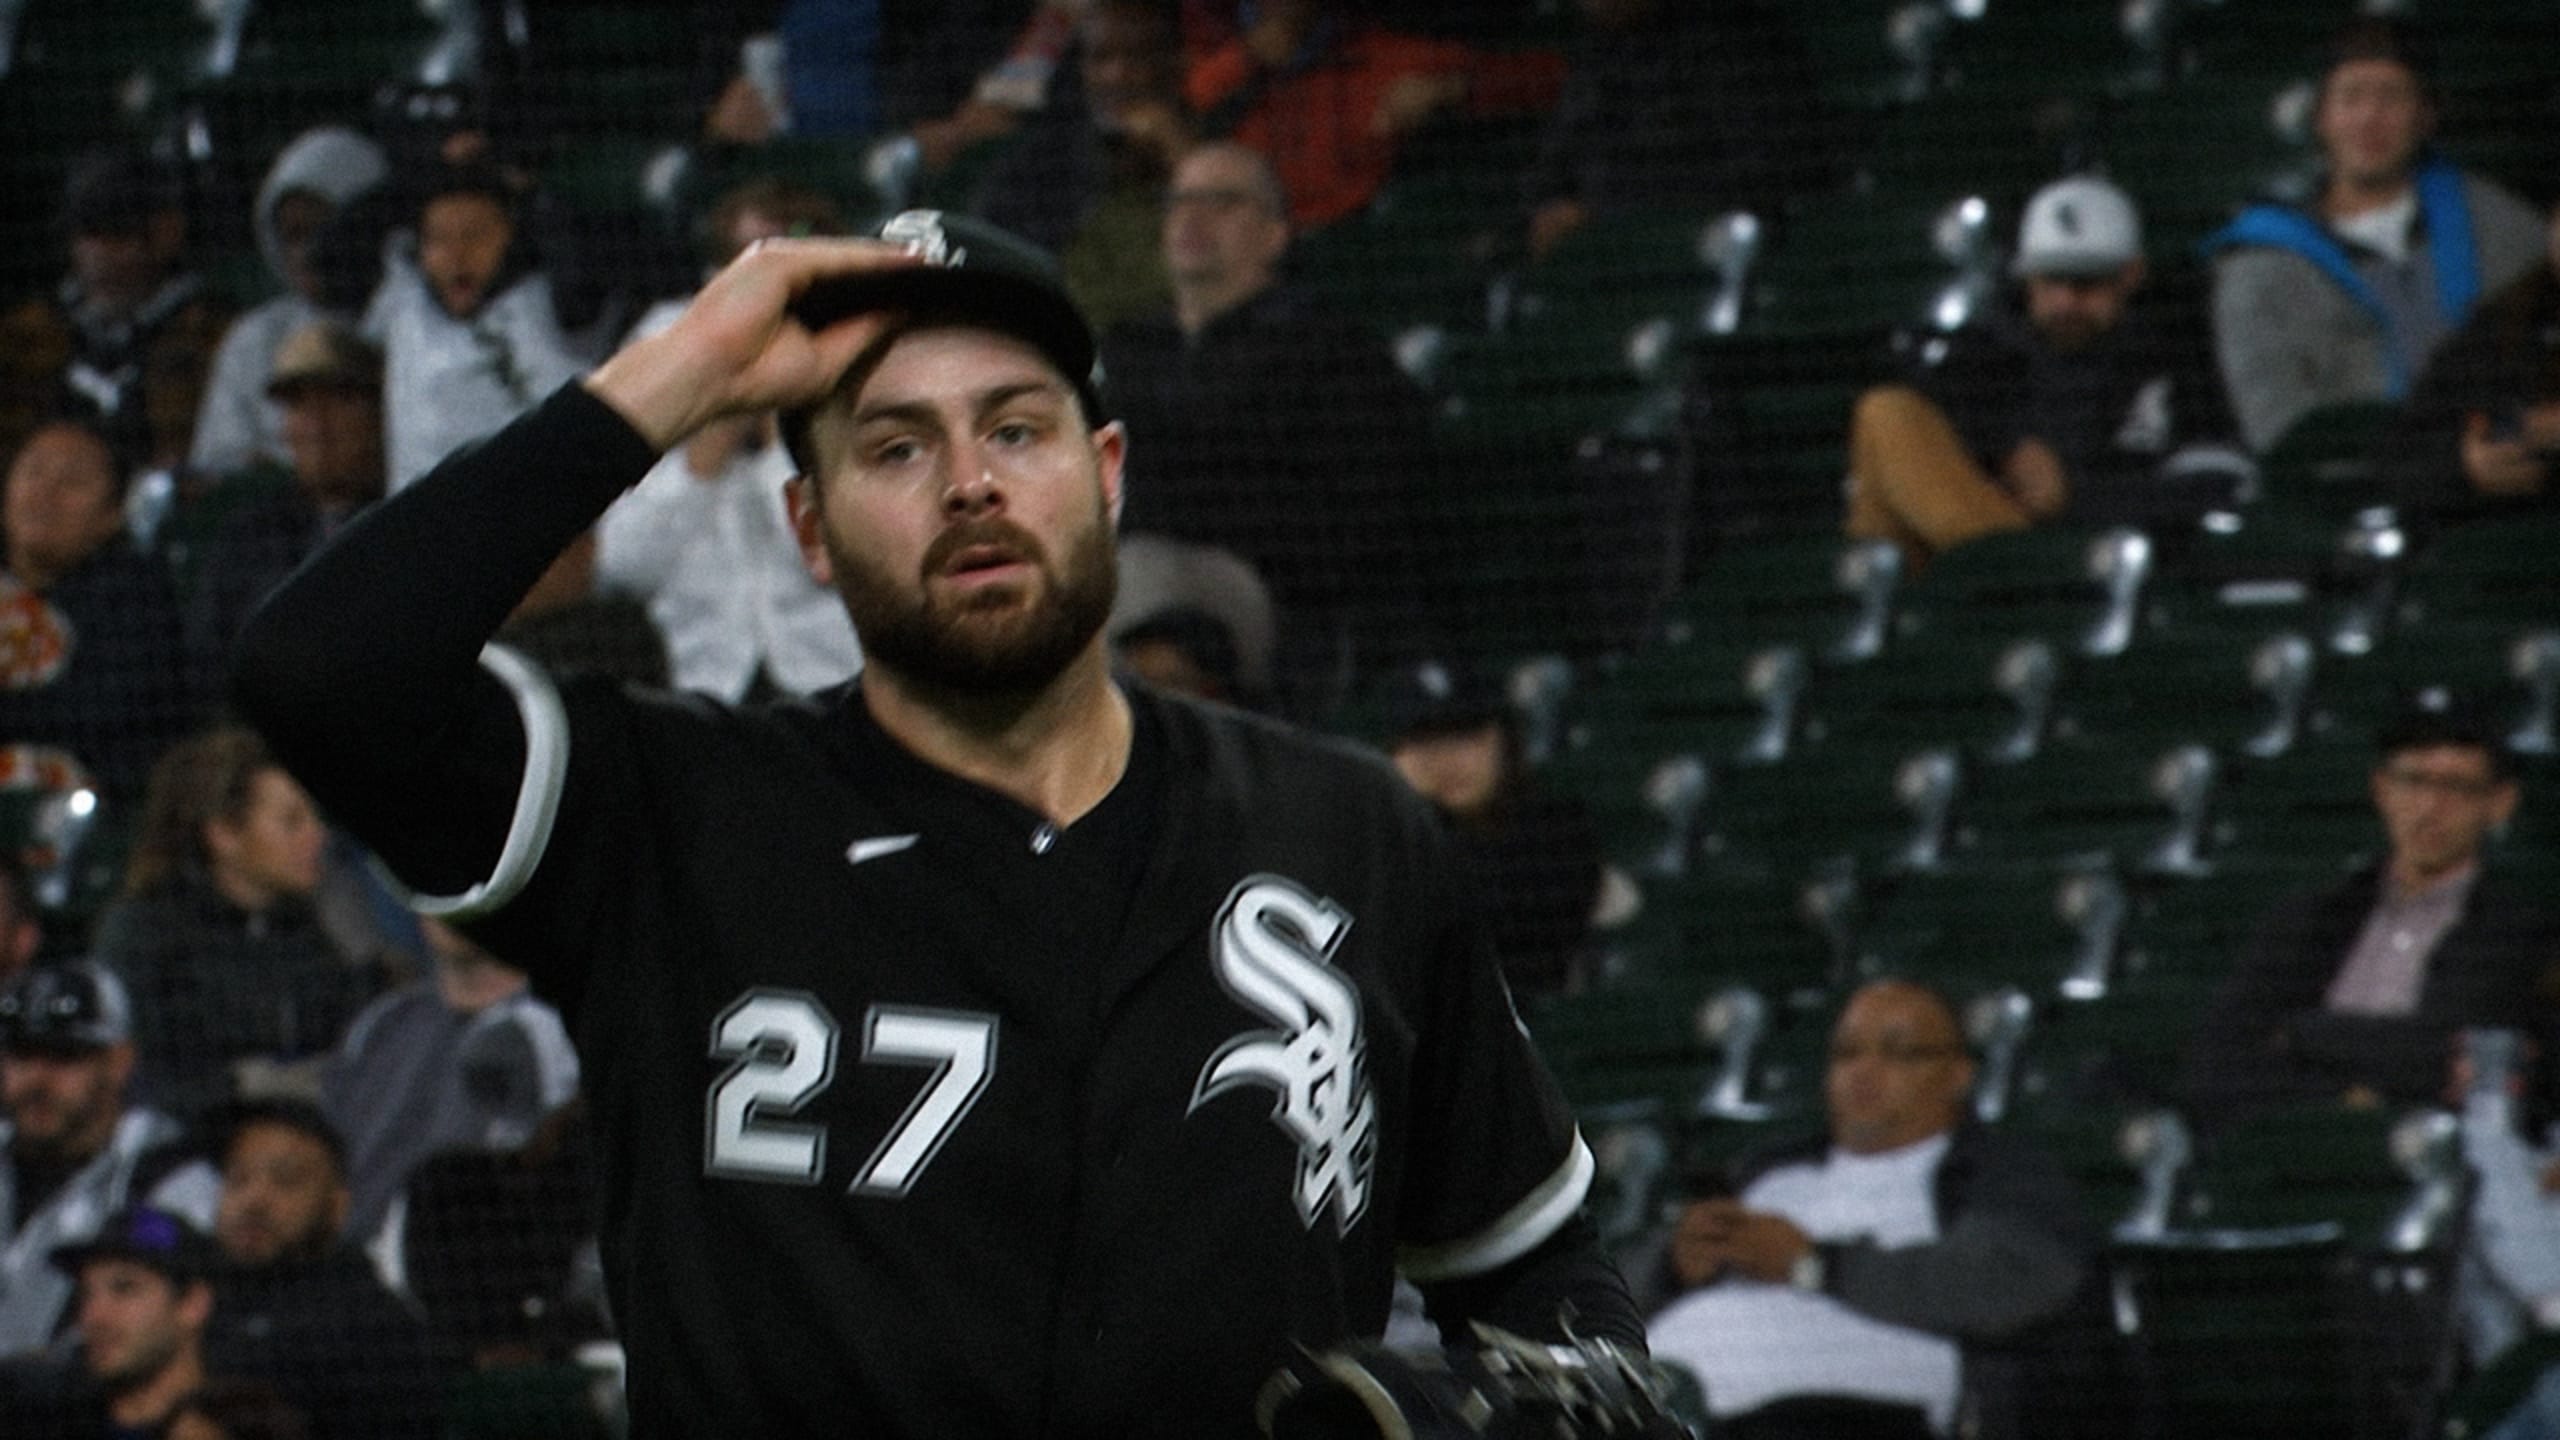 White Sox' Lucas Giolito gives up 7 runs in 4 innings, 13-9 loss to Pirates  – NBC Sports Chicago